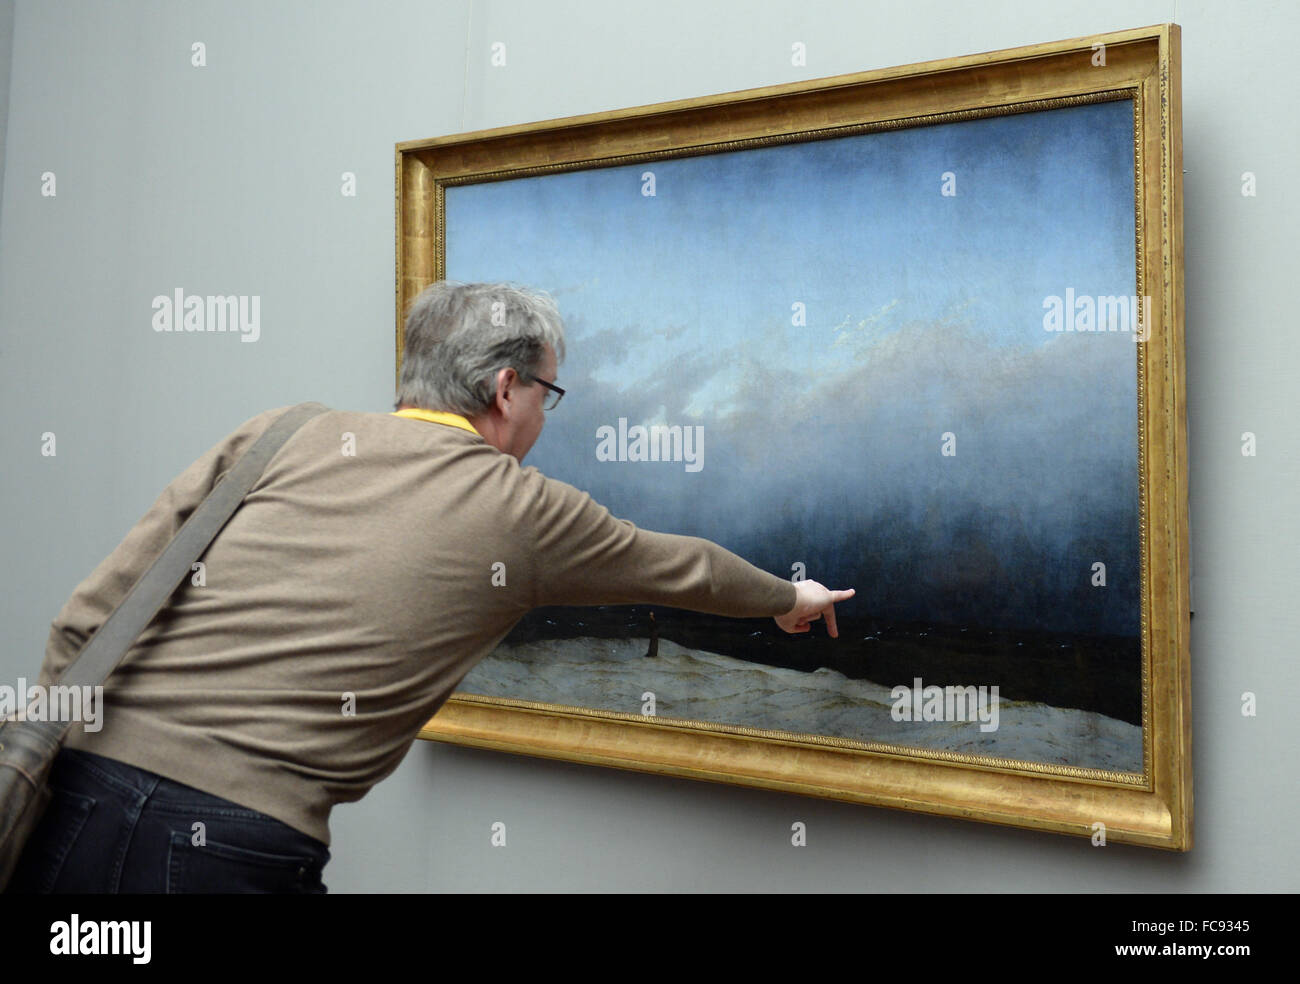 Berlin, Germany. 21st Jan, 2016. A visitor looks at the restored 'The Monk by the Sea' by painter Caspar David Friedrich (1774 - 1840) in the Alte Nationalgalerie in Berlin, Germany, 21 January 2016. The painting was restored from 2013 to 2016 and will be shown from 22 January to 22 May 2016 in a special presentation. Photo: BRITTA PEDERSEN/dpa/Alamy Live News Stock Photo